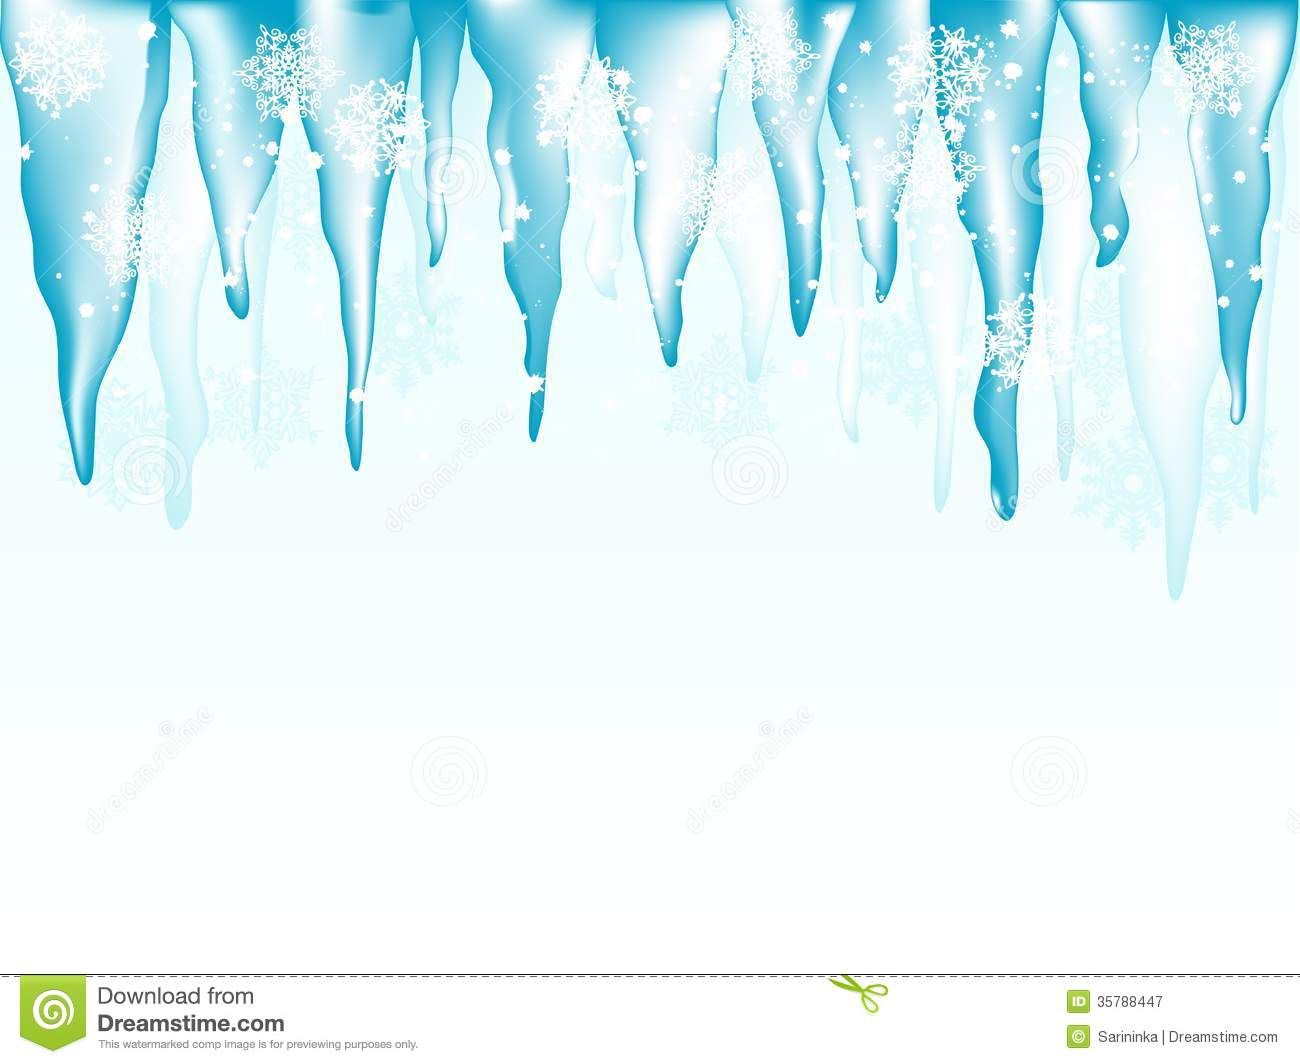 Icicles clipart ice crystal. Icicle border template clip